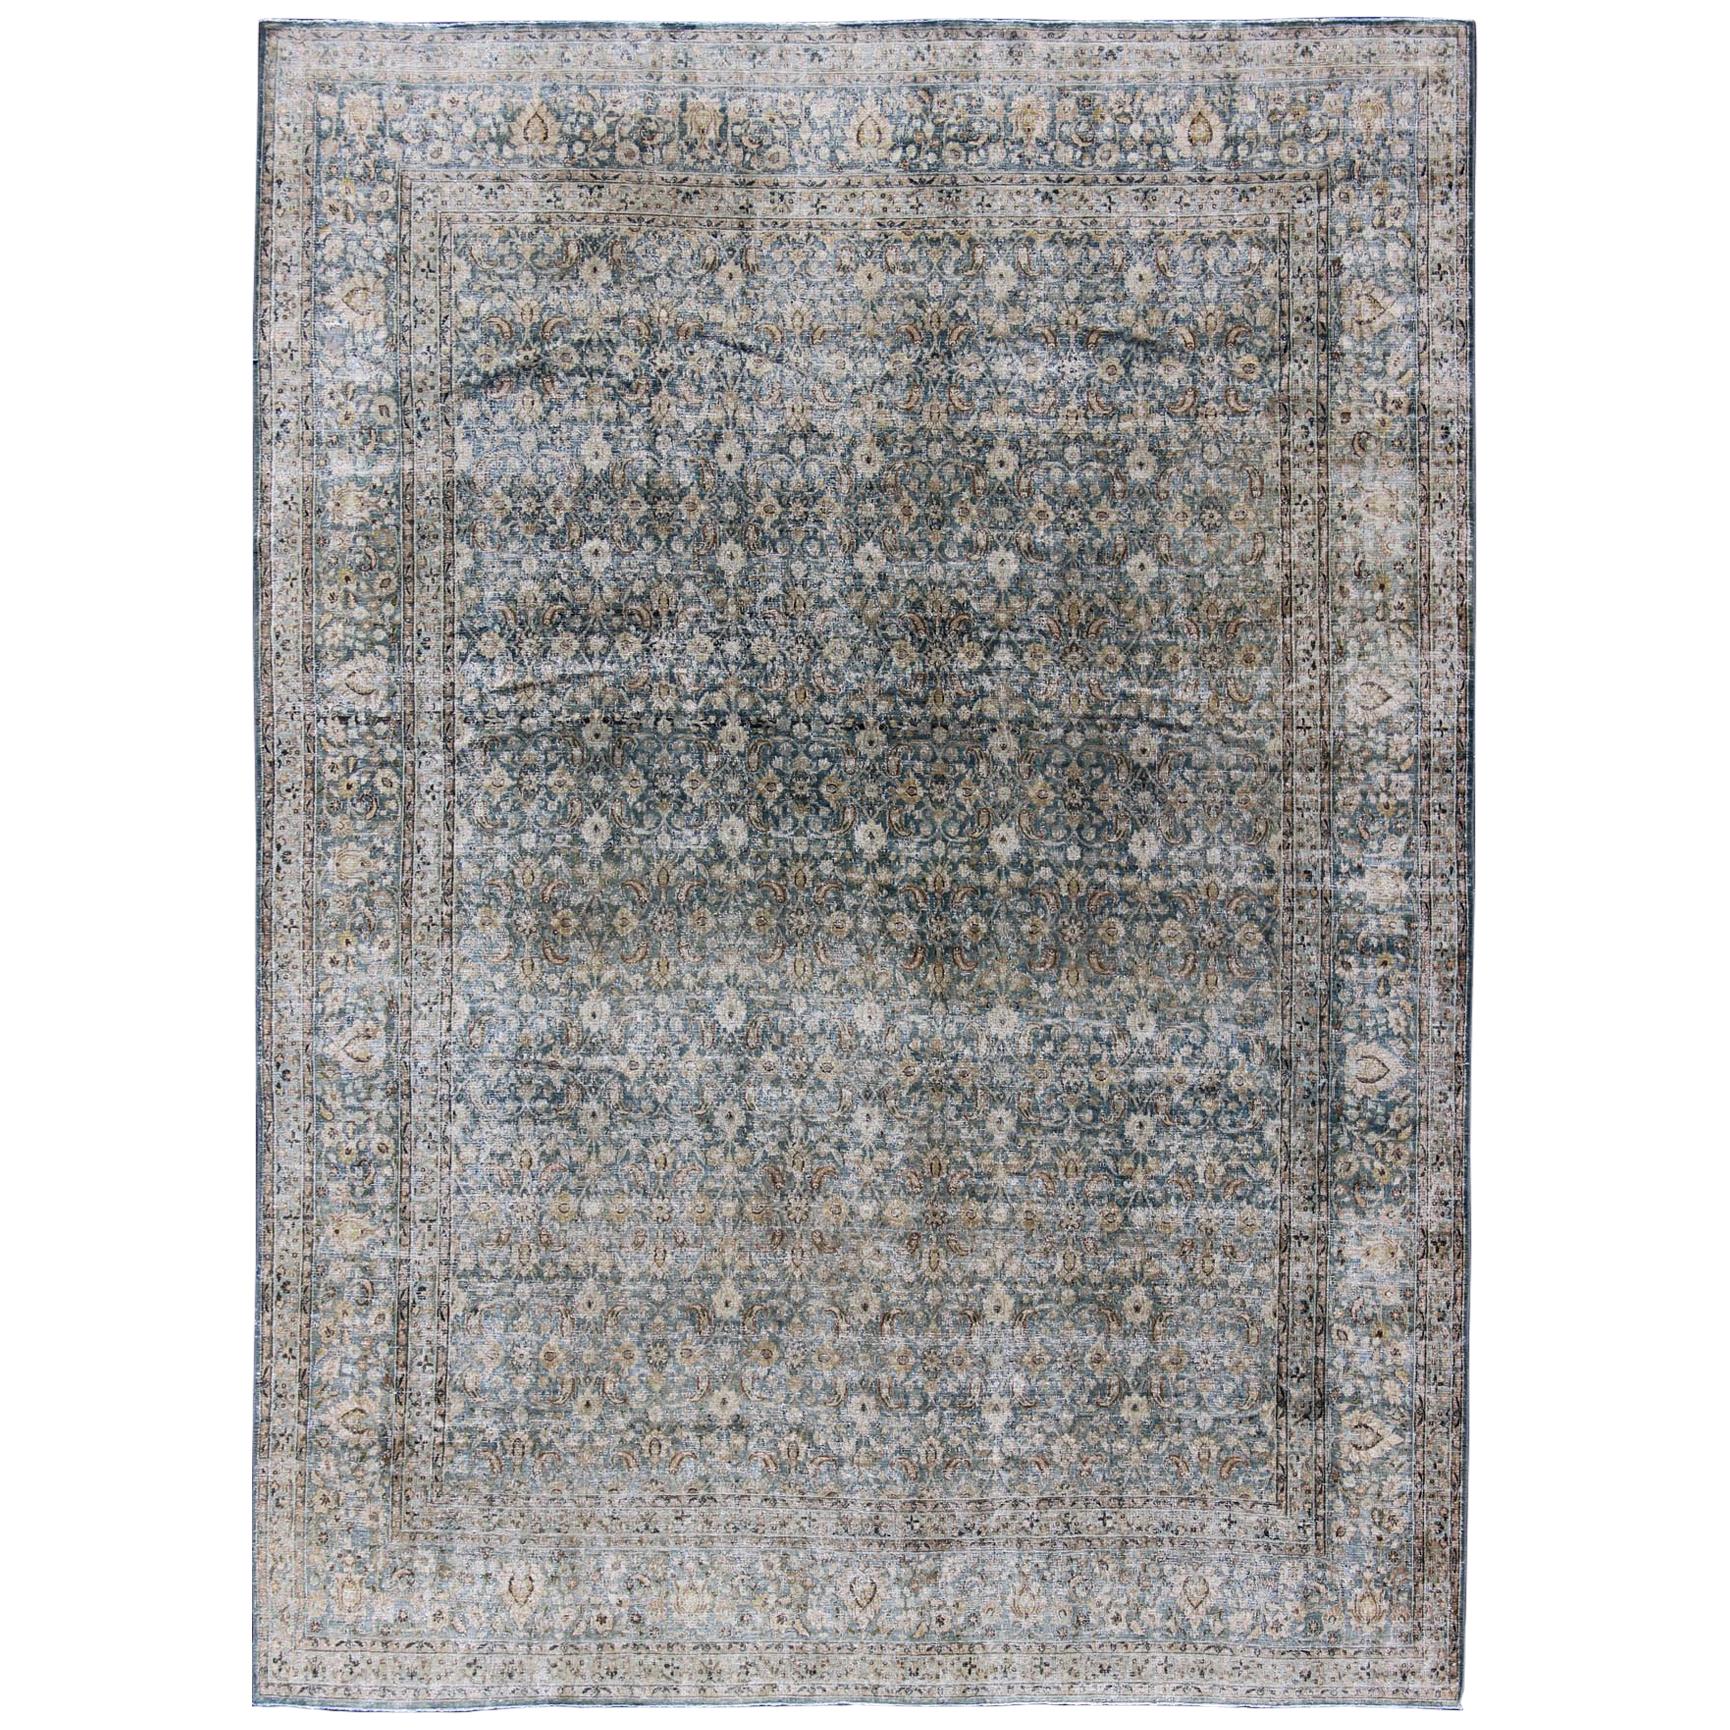 Antique Persian Khorasan Rug with Herati design in Blue, Light Gray & Brown